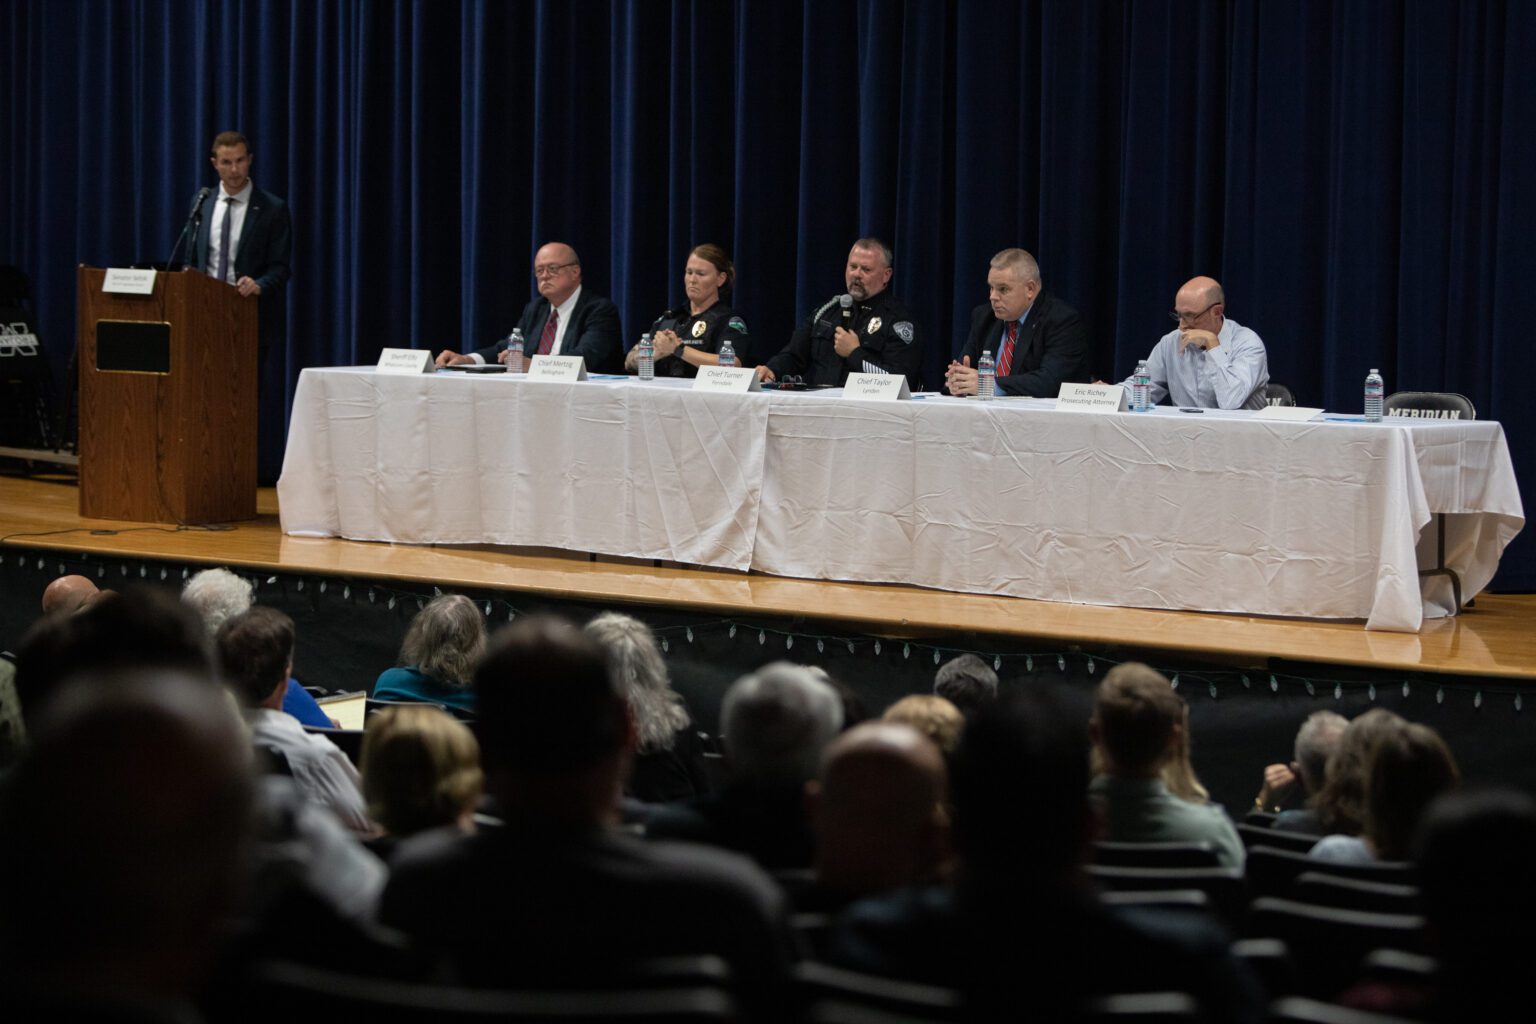 Dozens of people attended a public safety forum hosted by Republican Sen. Simon Sefzik